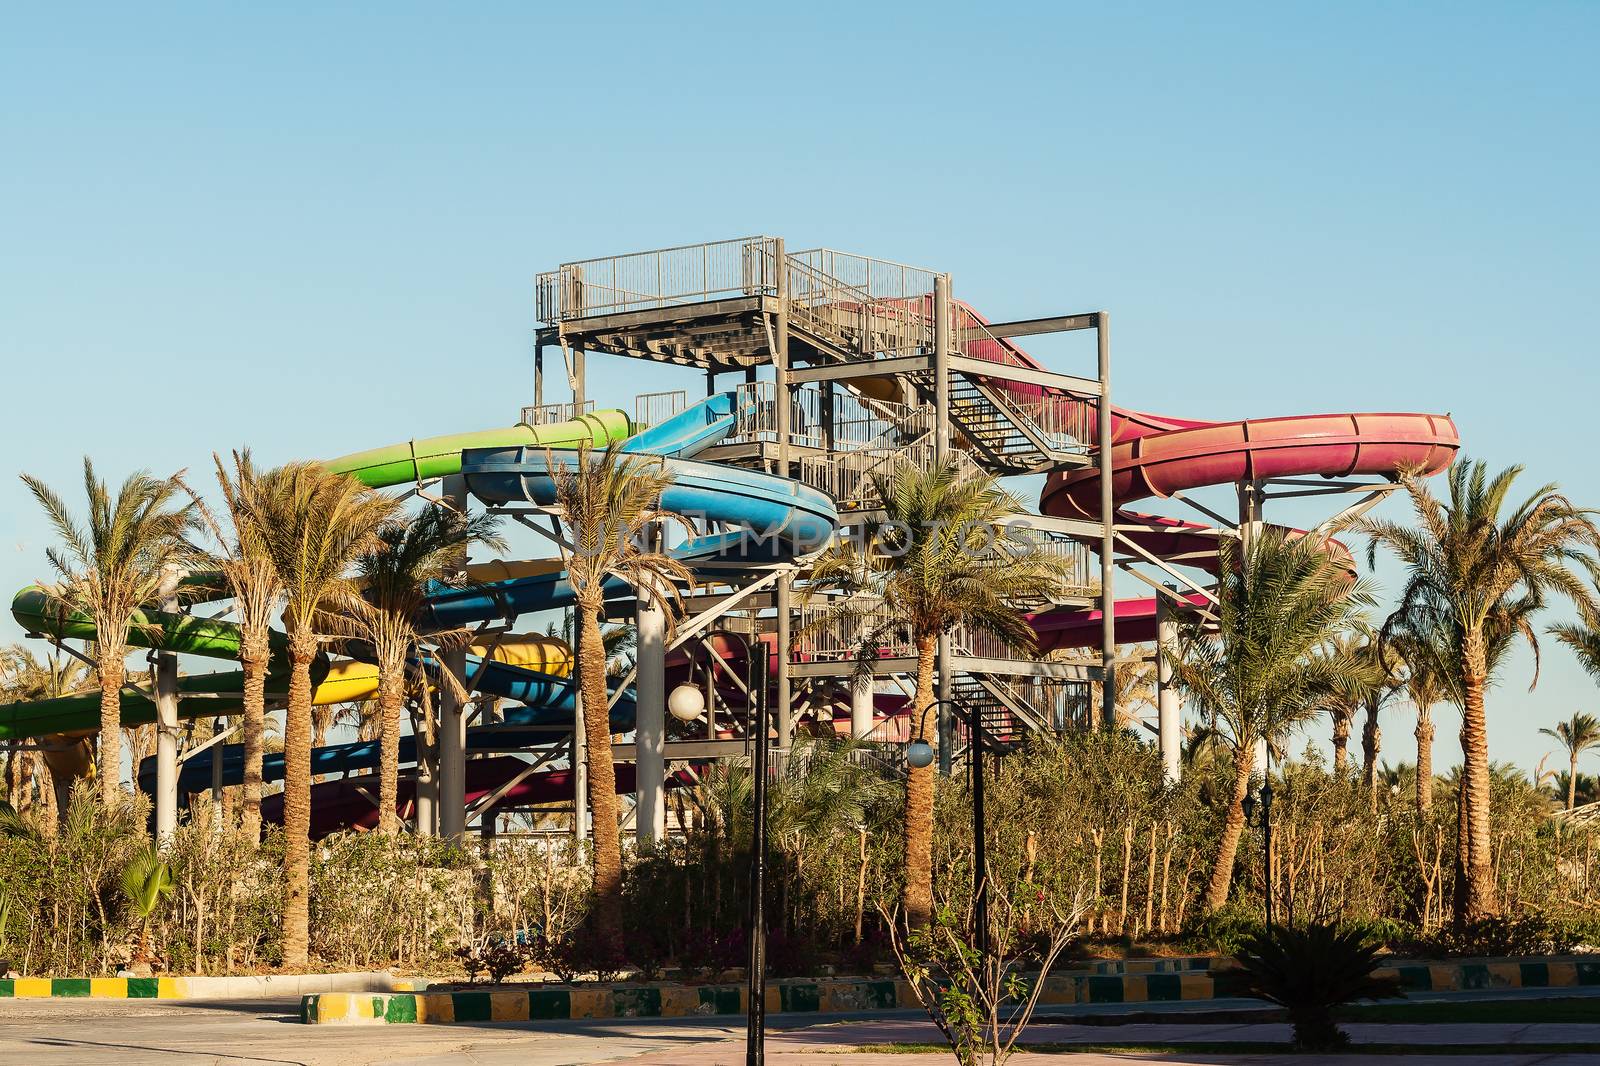 large water park on a background of palm trees.